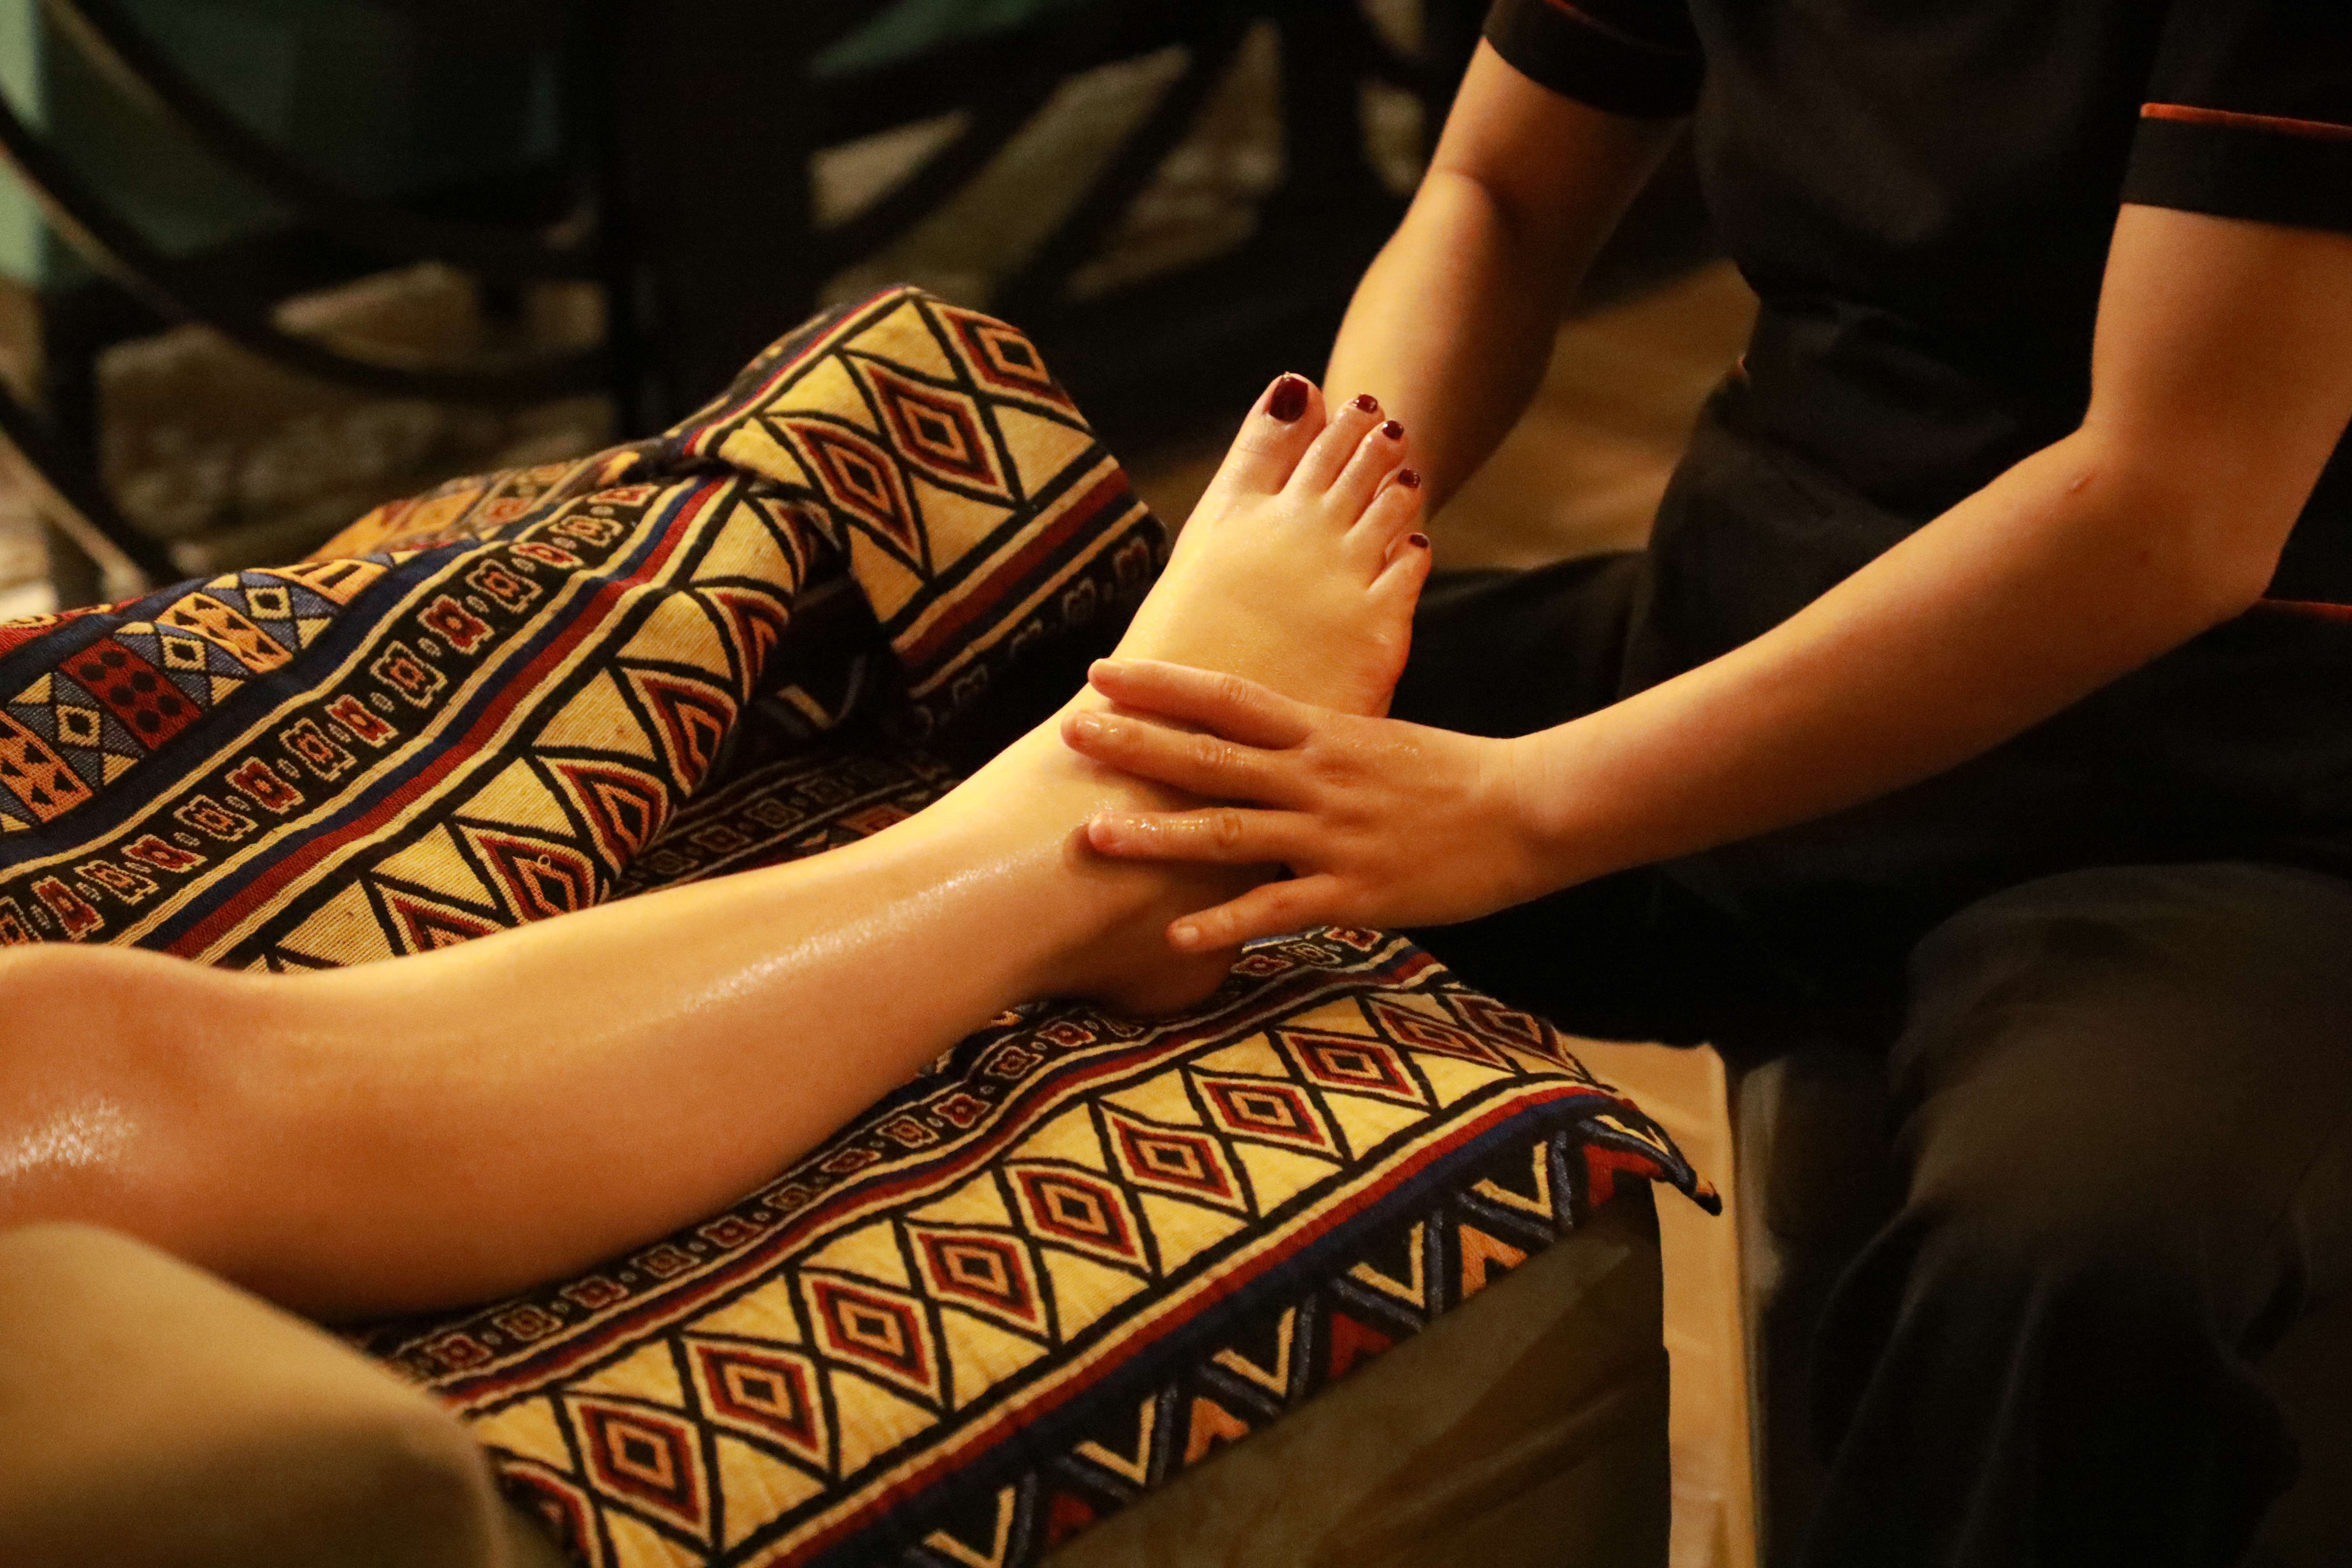 The wonders of massage and acupressure on the foot area.